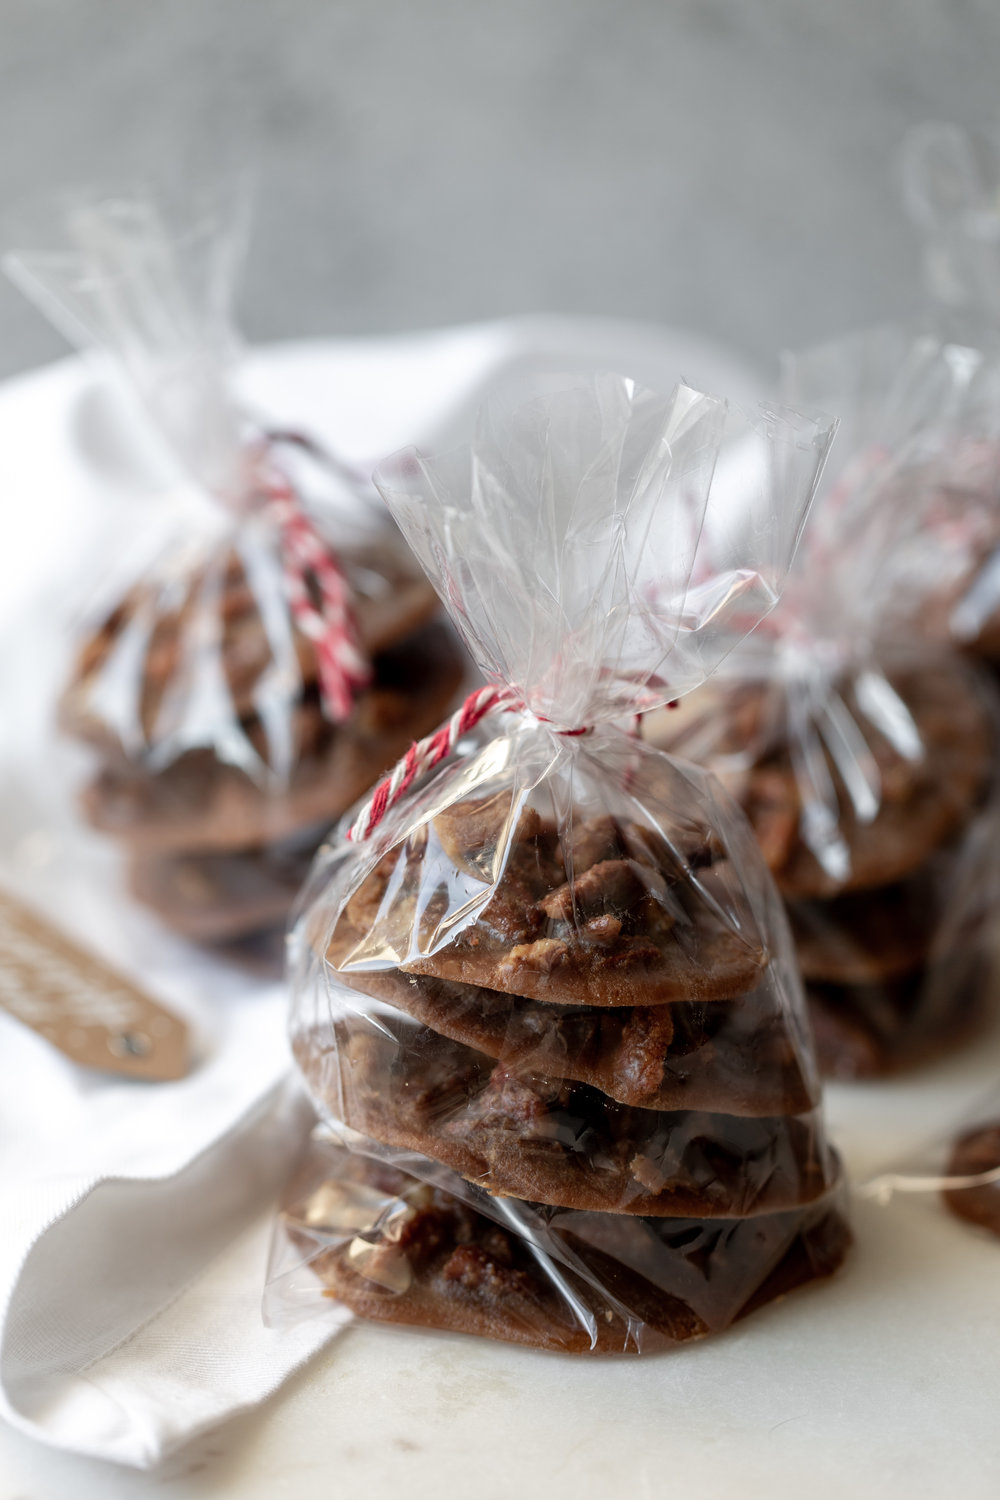 Creamy Bananas Foster Pecan Pralines recipe wrapped in cellophane holiday gift